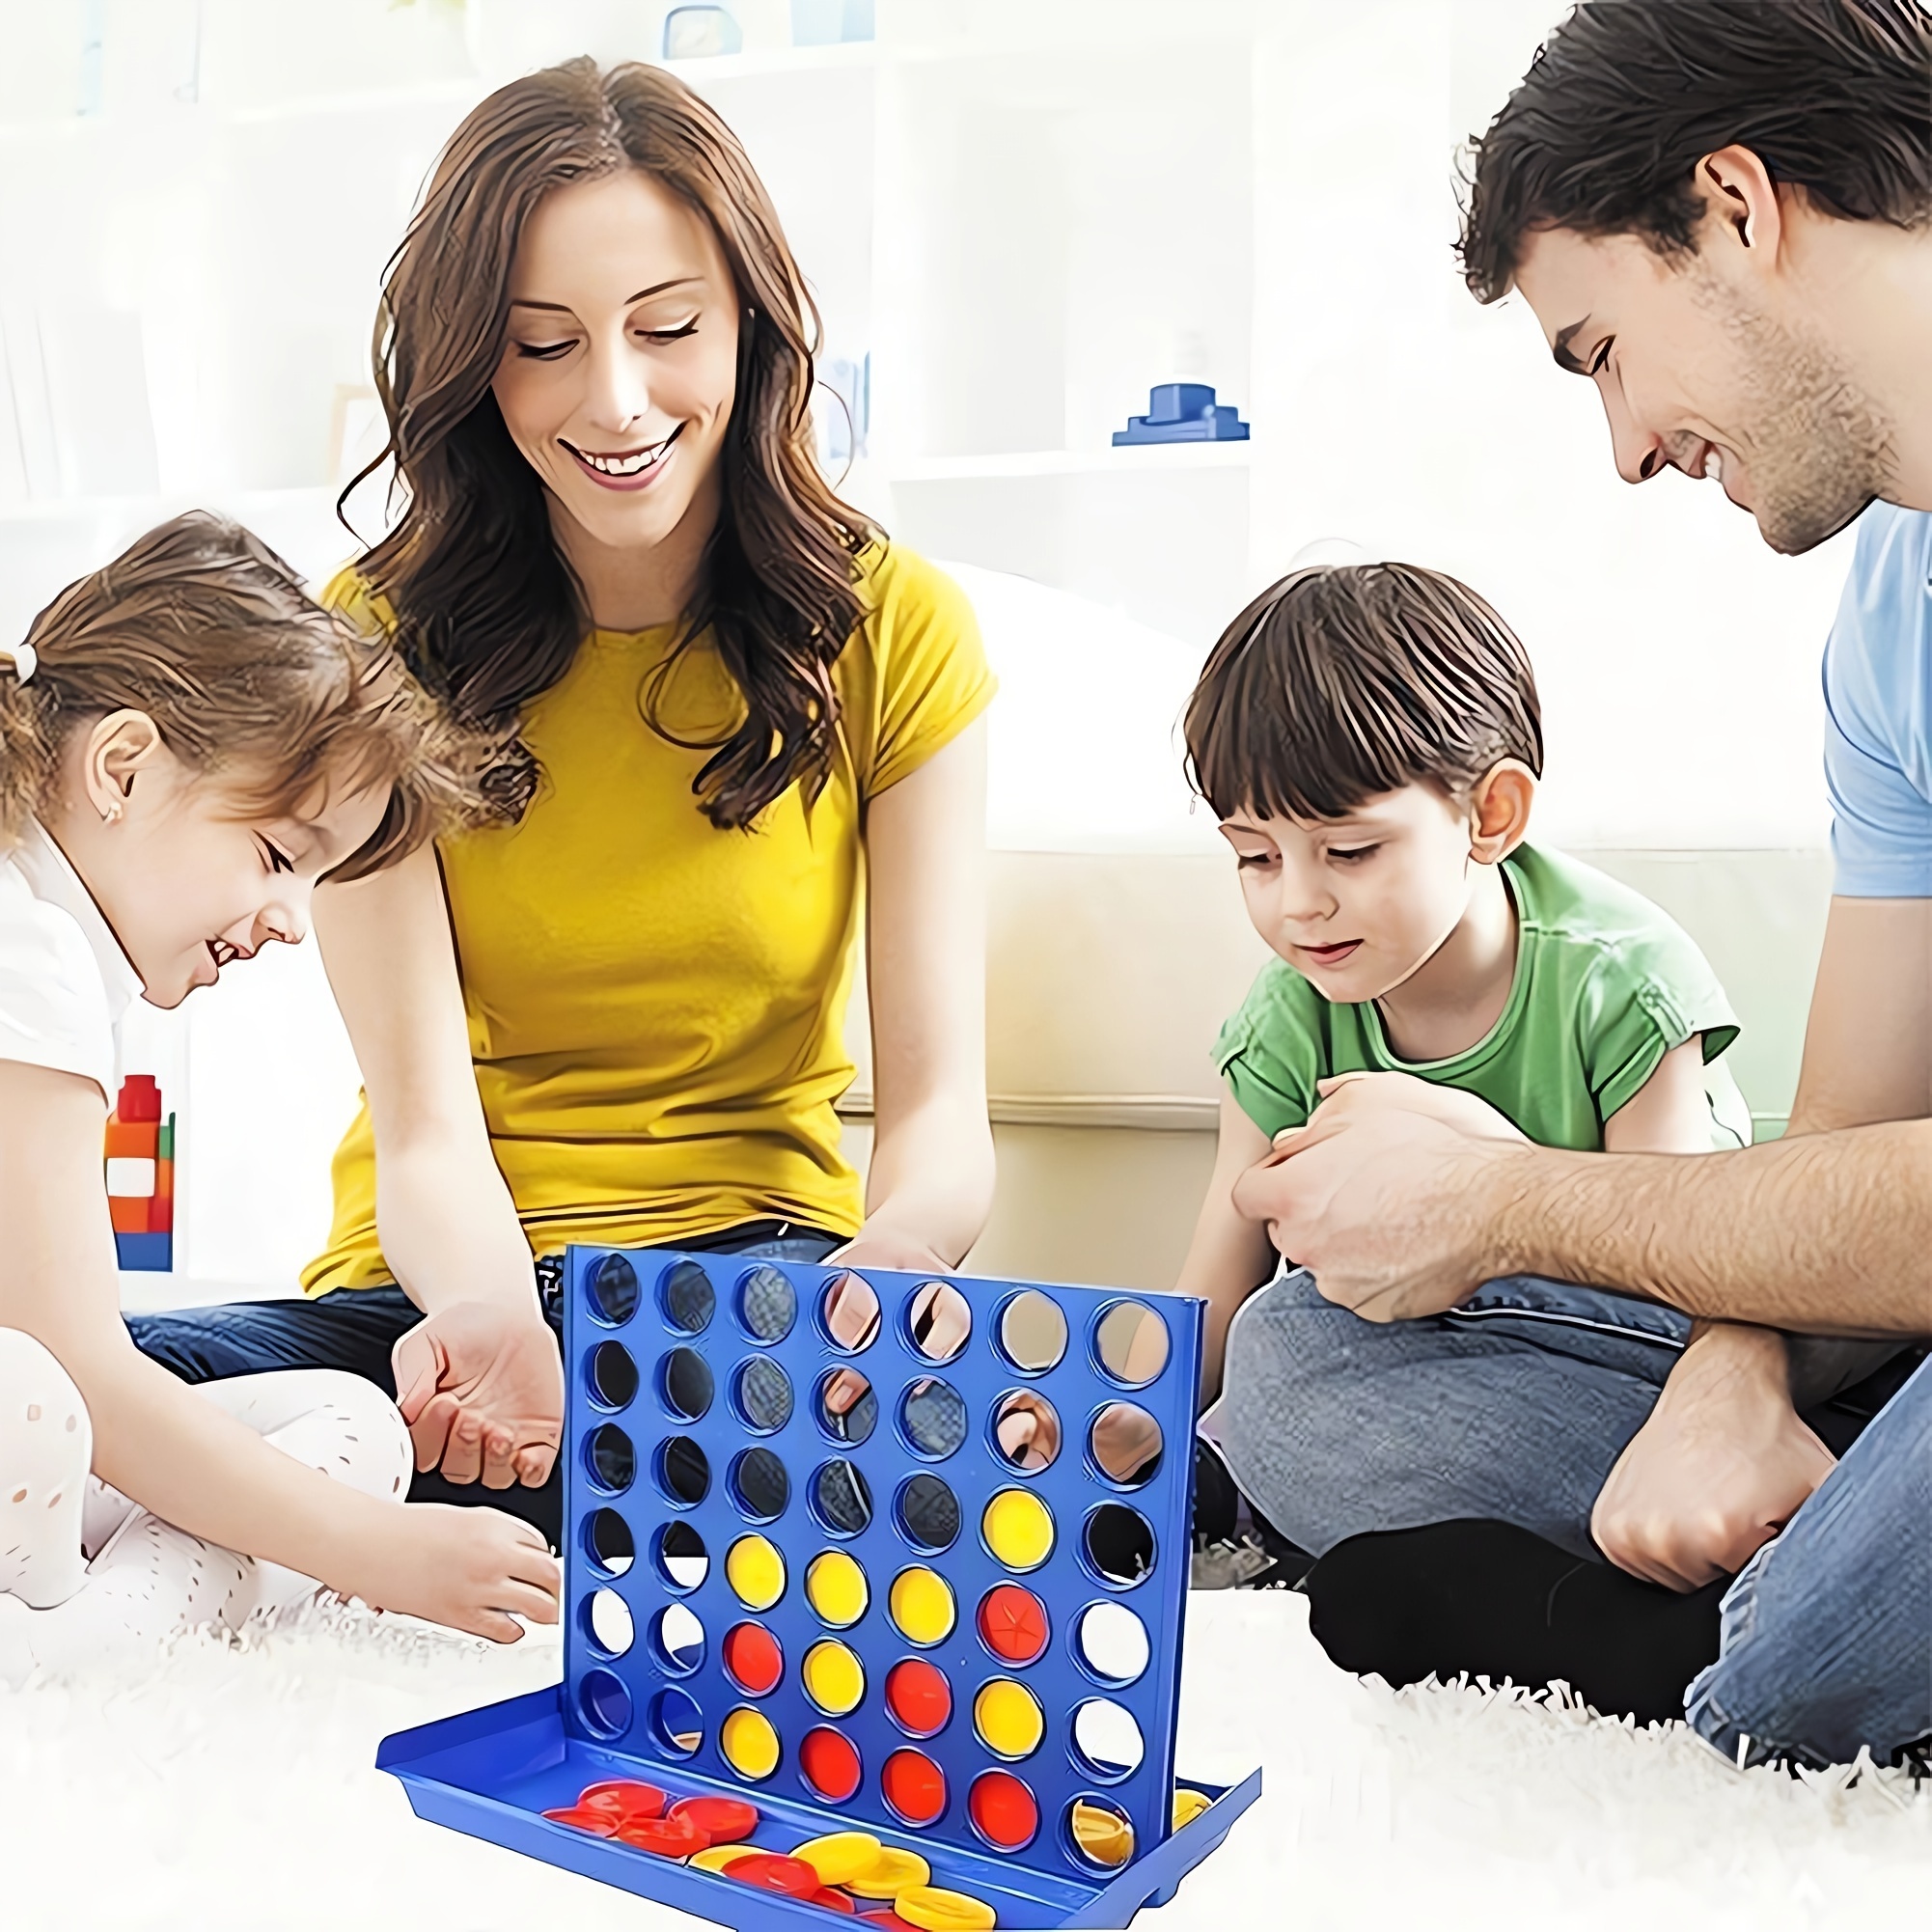 

Bestseller, Connect 4 Classic Grid, 4 In A Row Game, Strategy Board Games For Kids, 2 Player. For Family And Kids, Ages 6 And Up, Gaming Gift